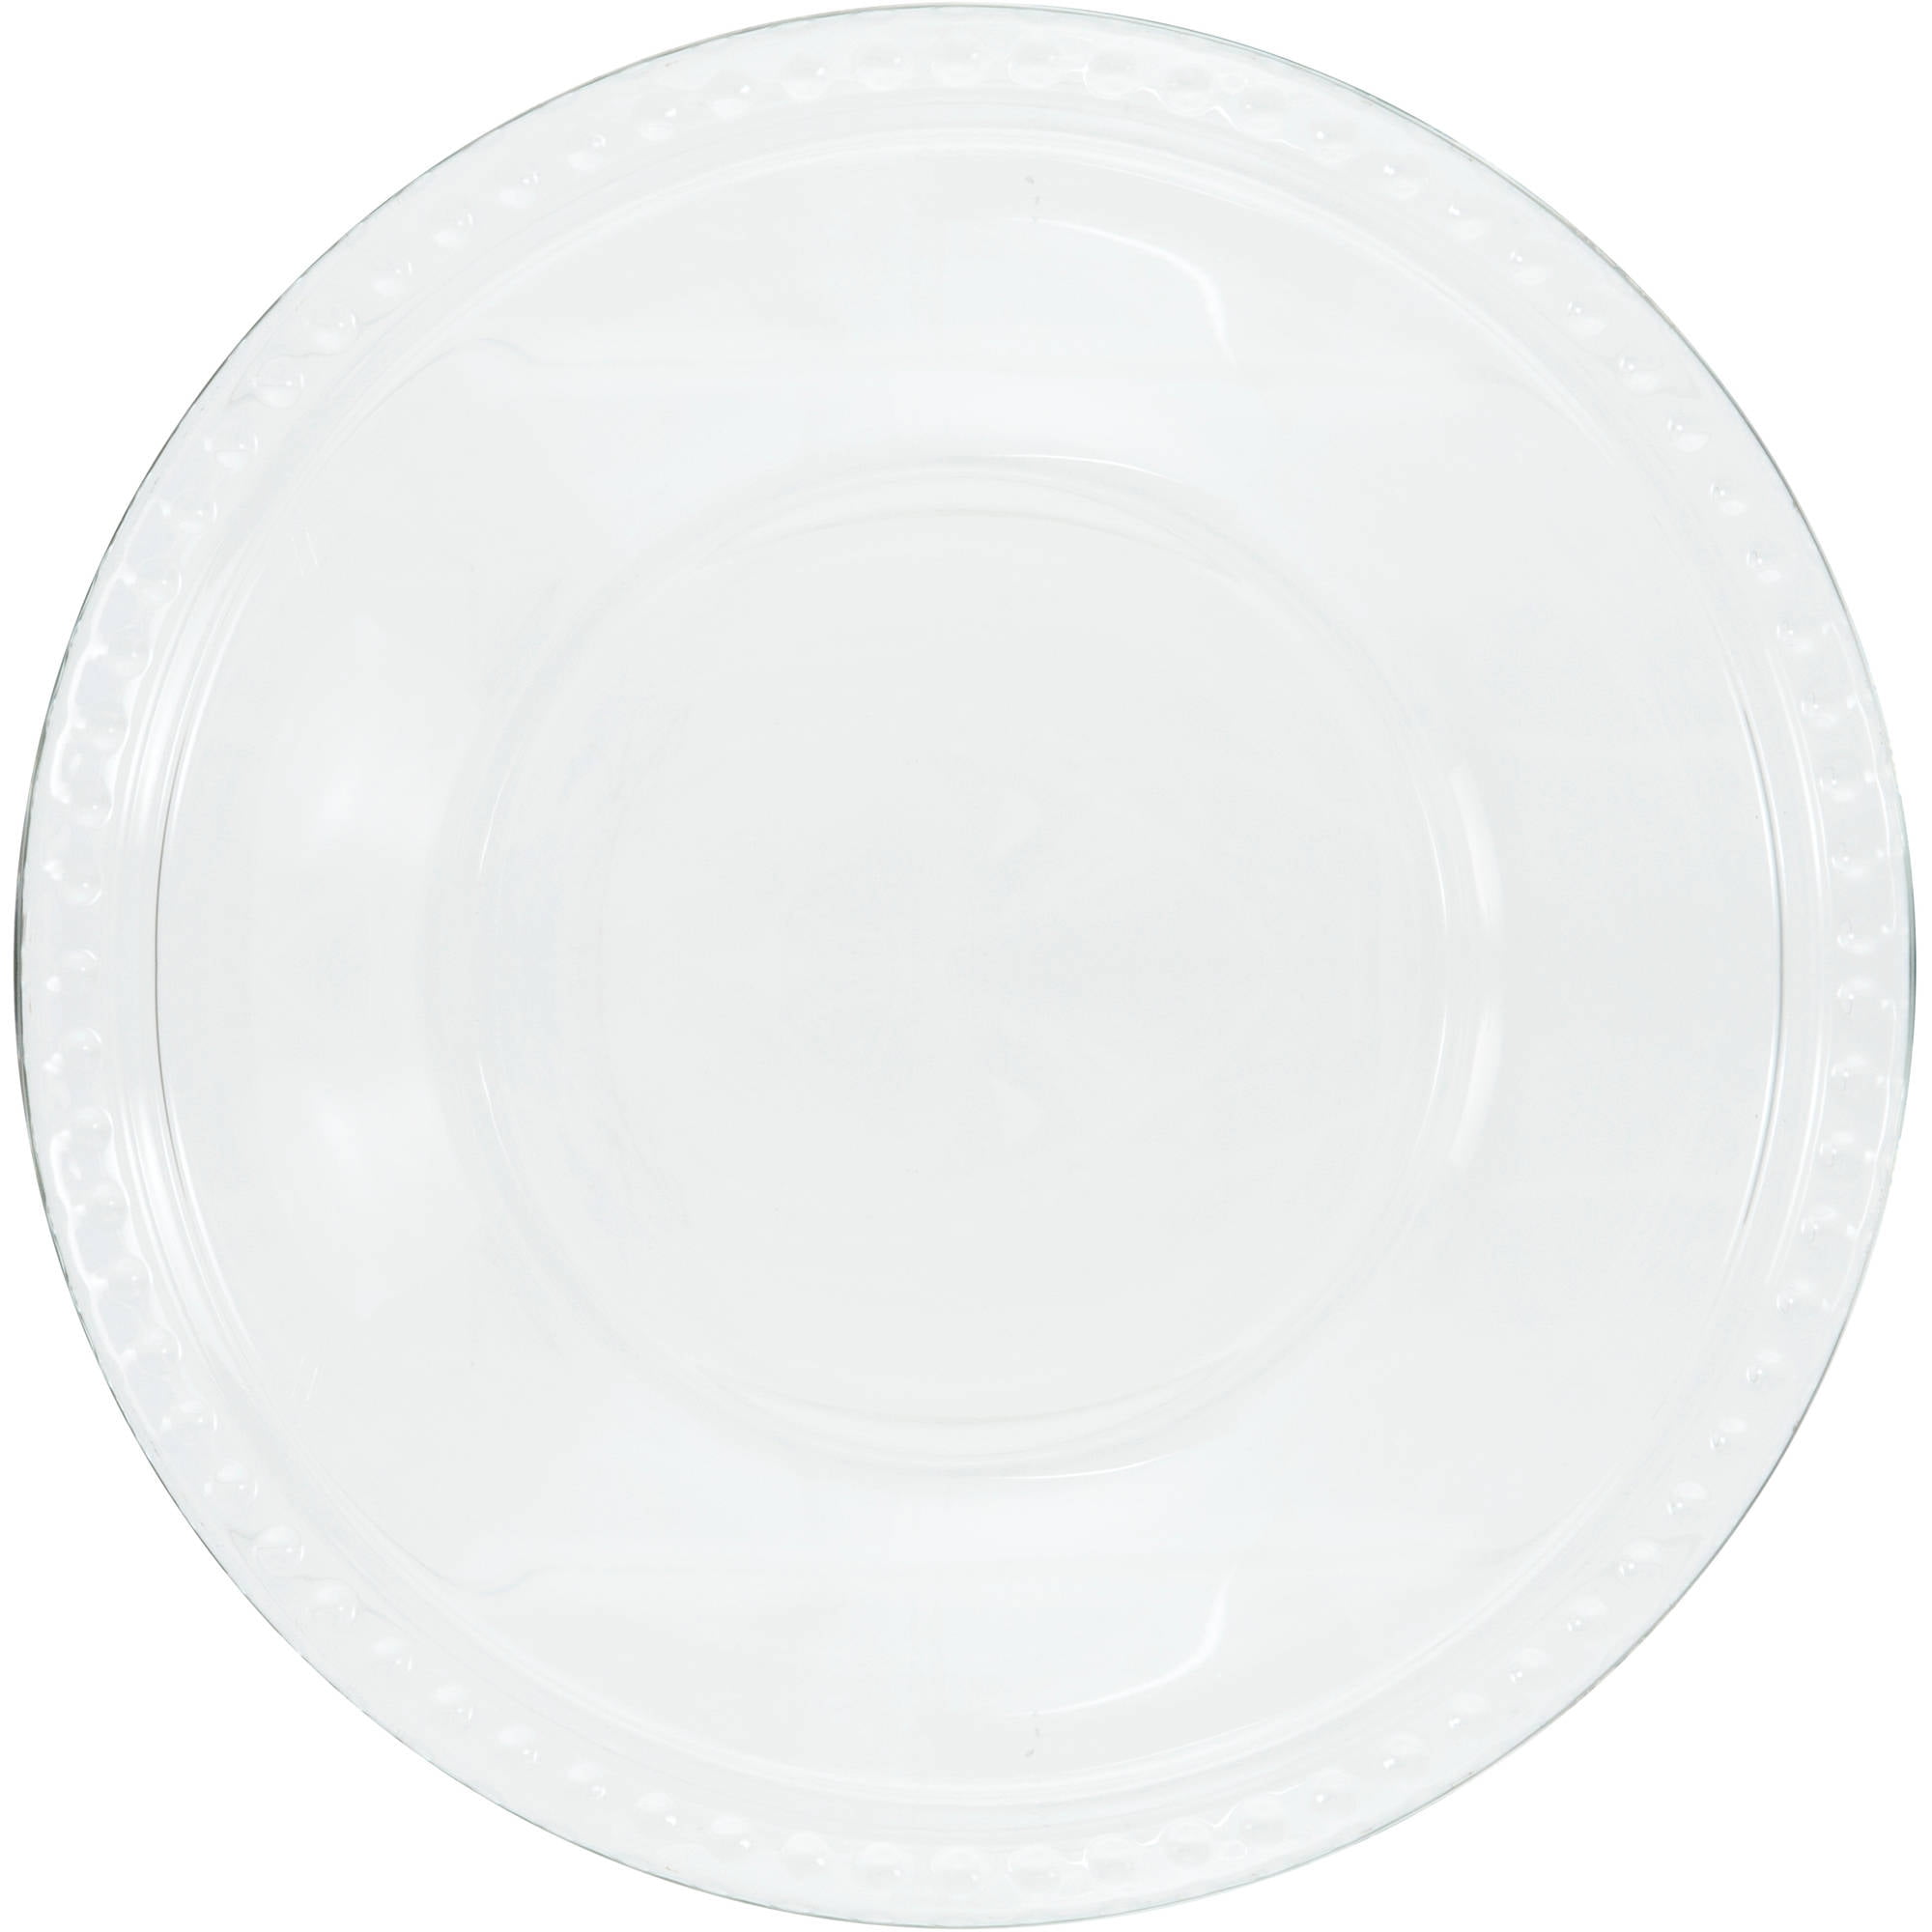 Details about   CHRISTMSAS Clear Serving or Dinner Plate 11" 